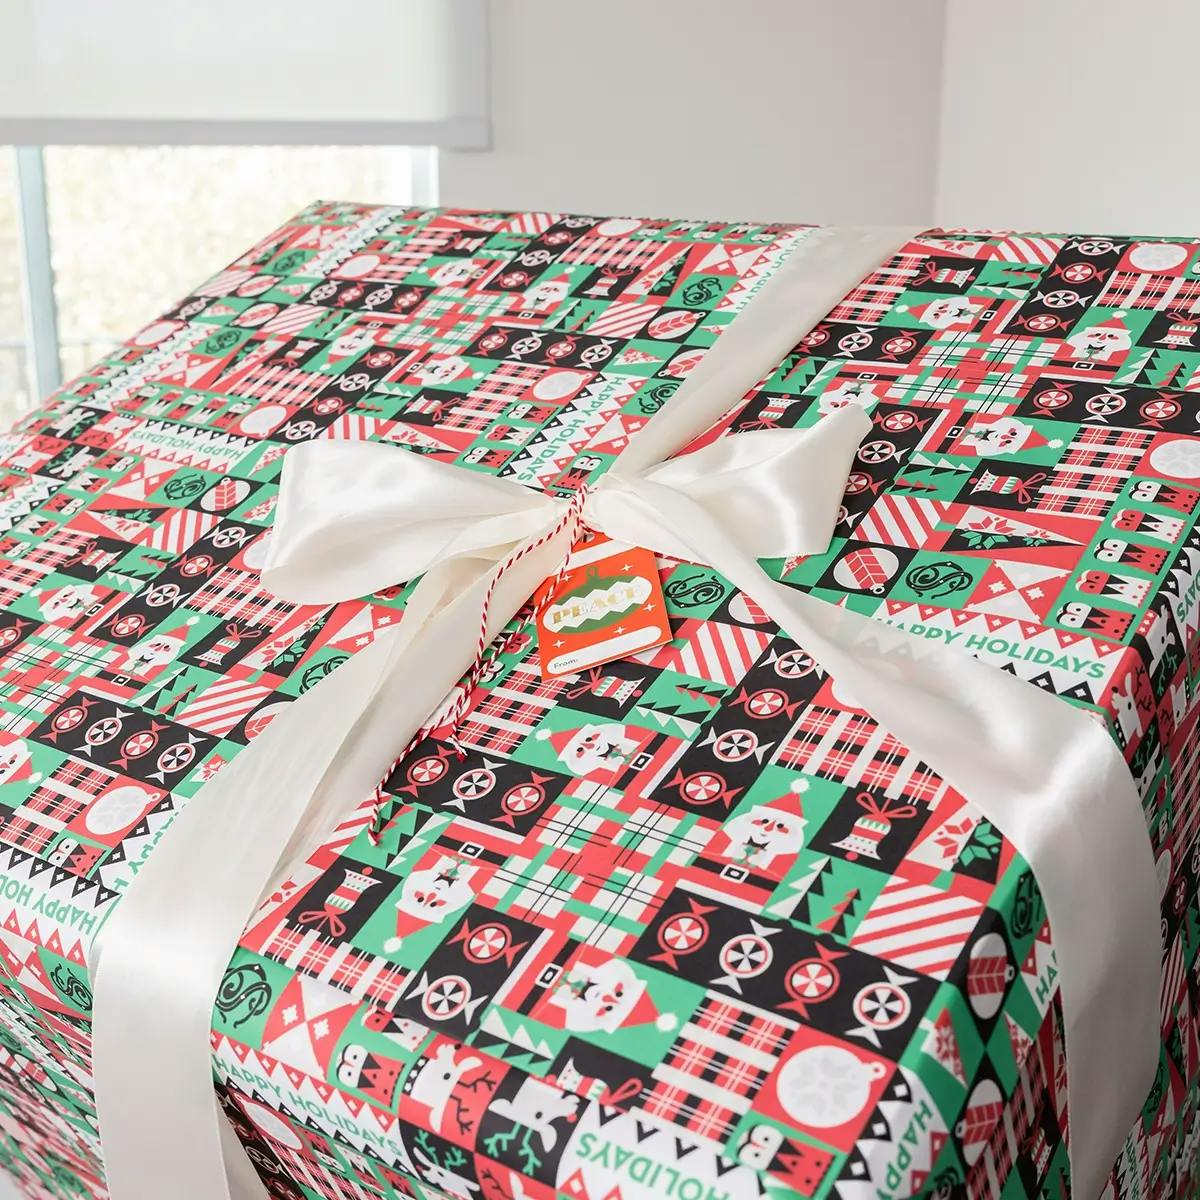 A large box wrapped with SANTA.COM branded wrapping paper and tied with white ribbon.